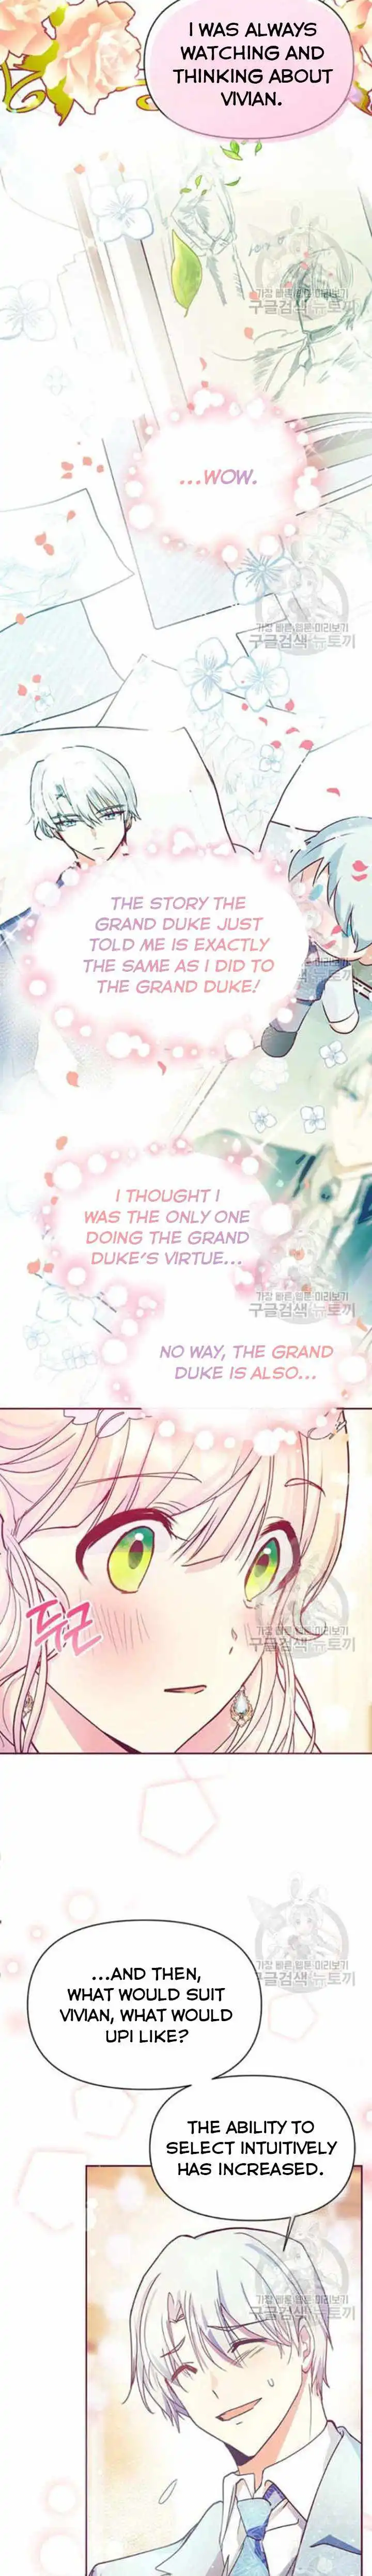 Grand Duke, It Was a Mistake! Chapter 34